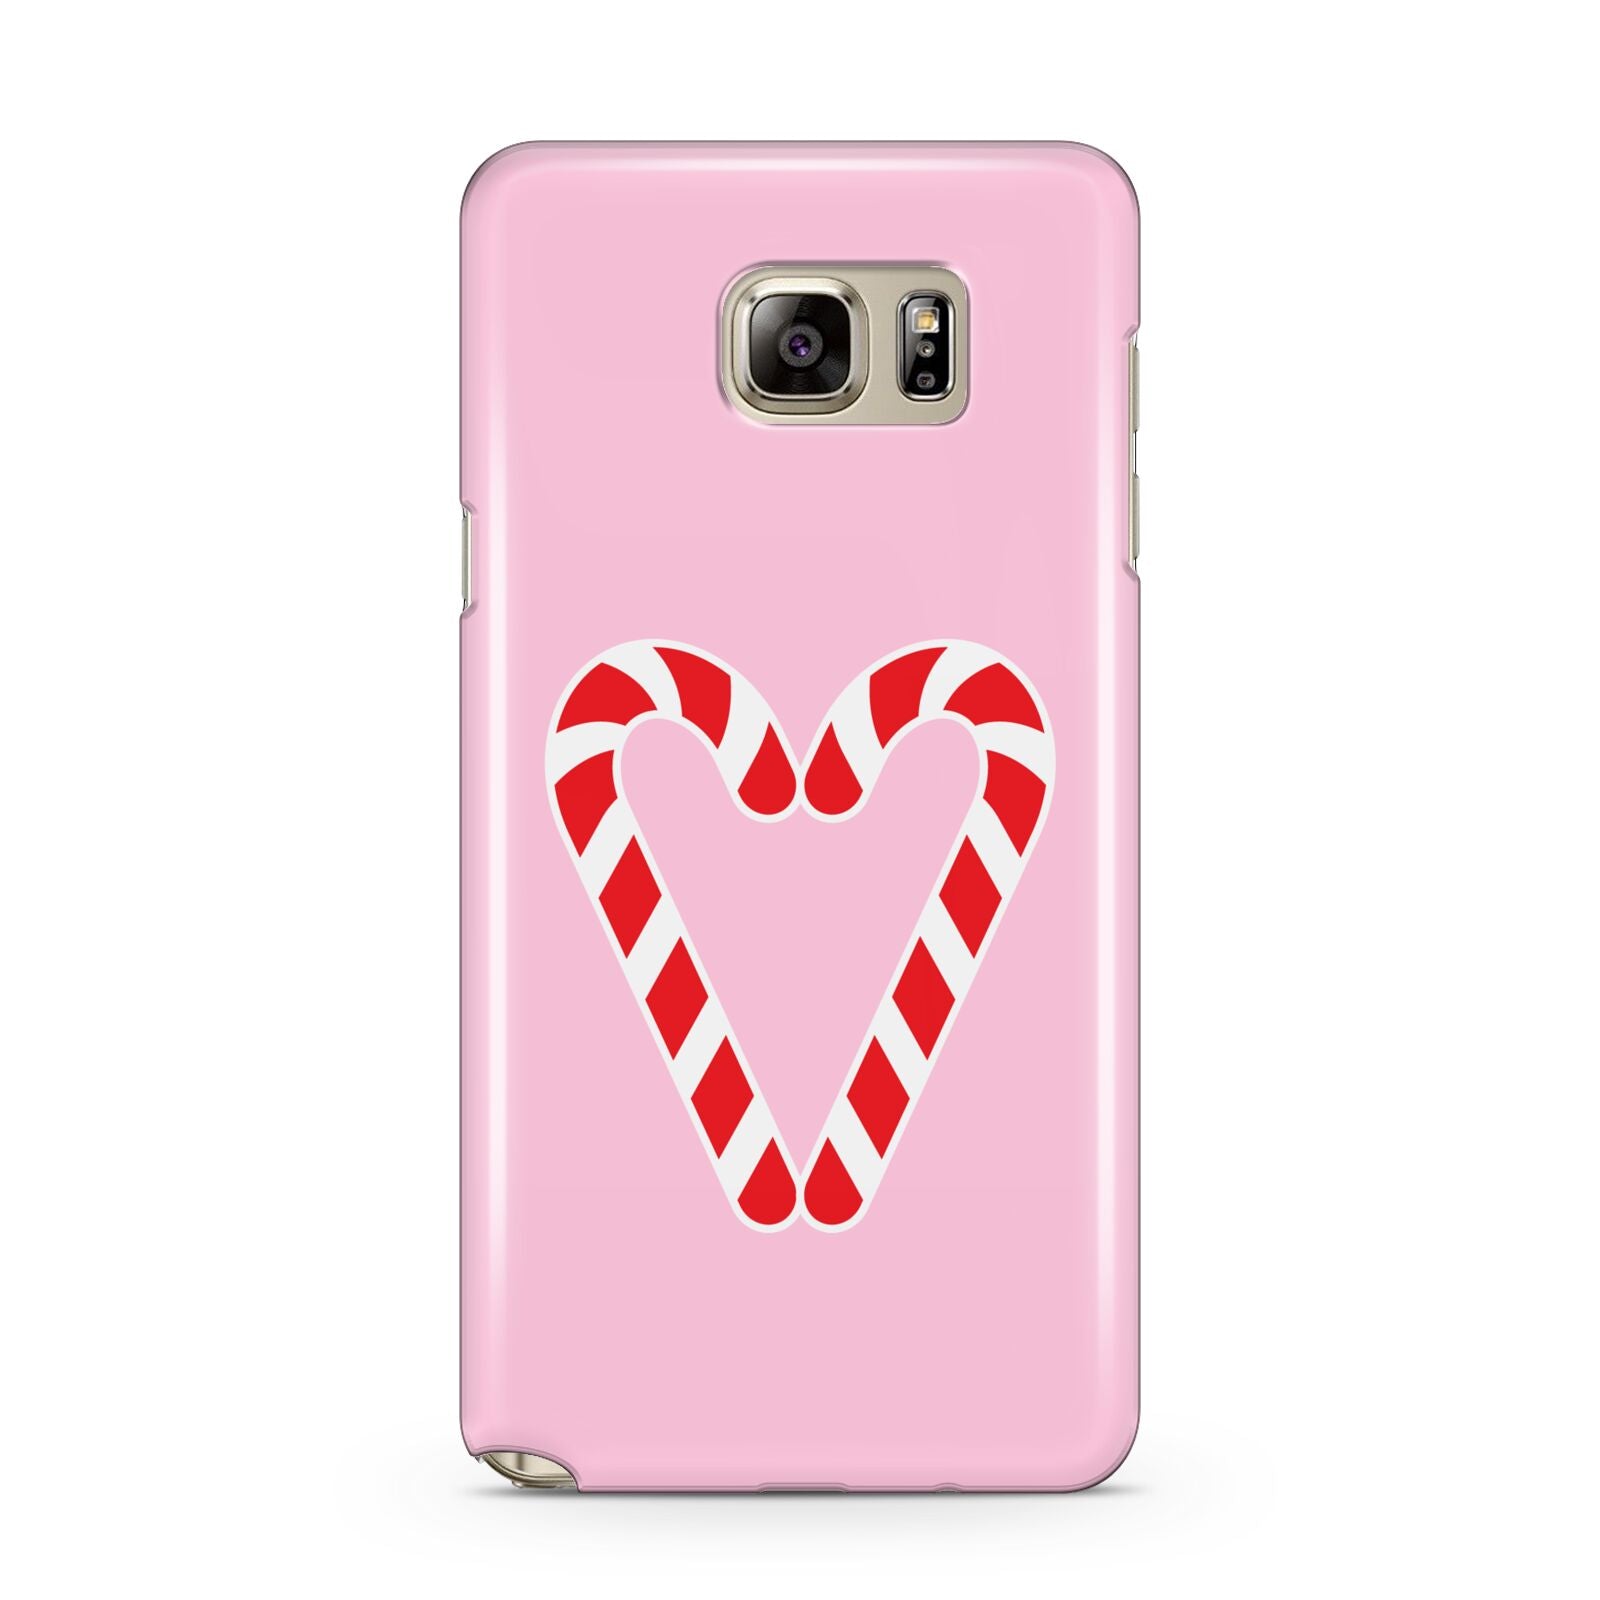 Candy Cane Heart Samsung Galaxy Note 5 Case